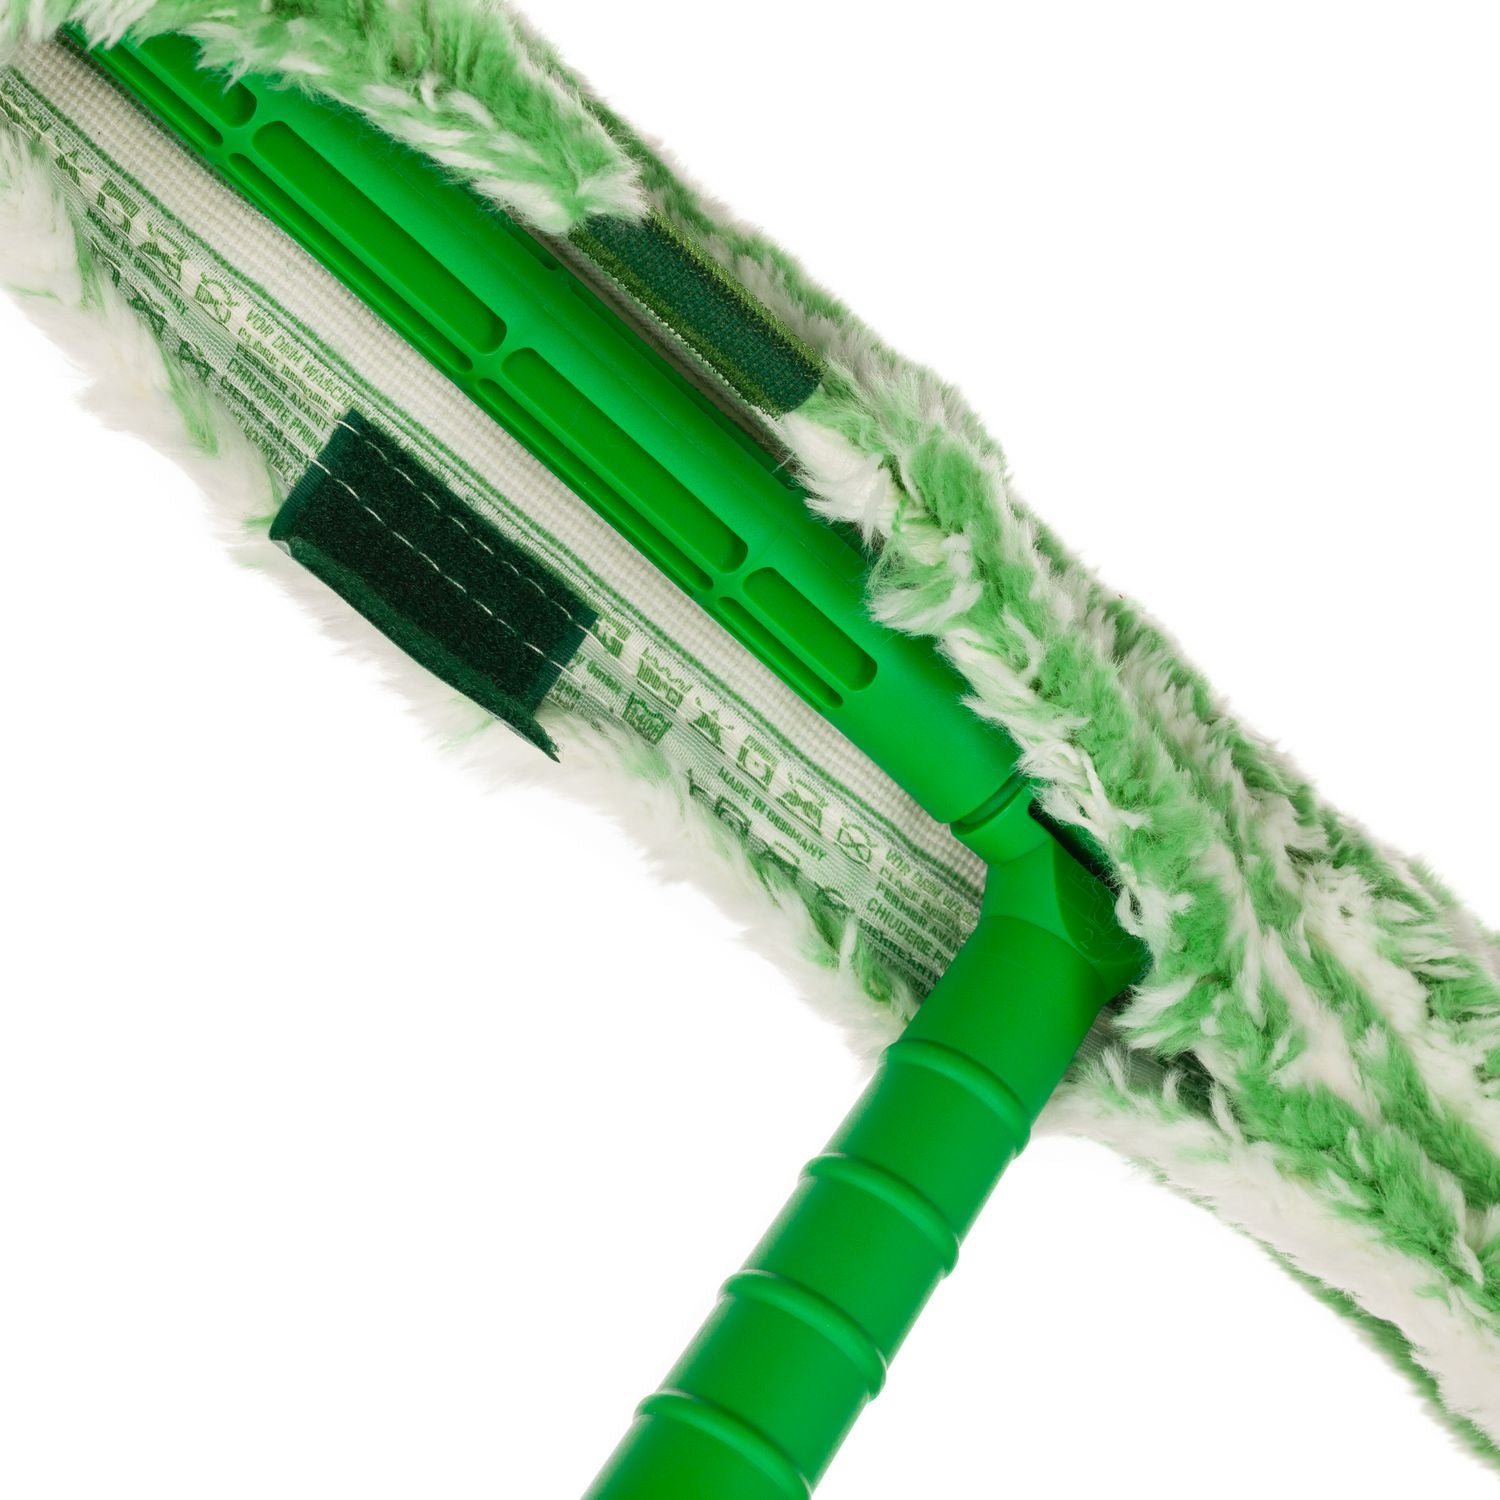 monsoon-plus-stripwasher-complete-with-green-plastic-handle-green-white-sleeve-18-wide-sleeve-10-carton_ungmc450 - 2